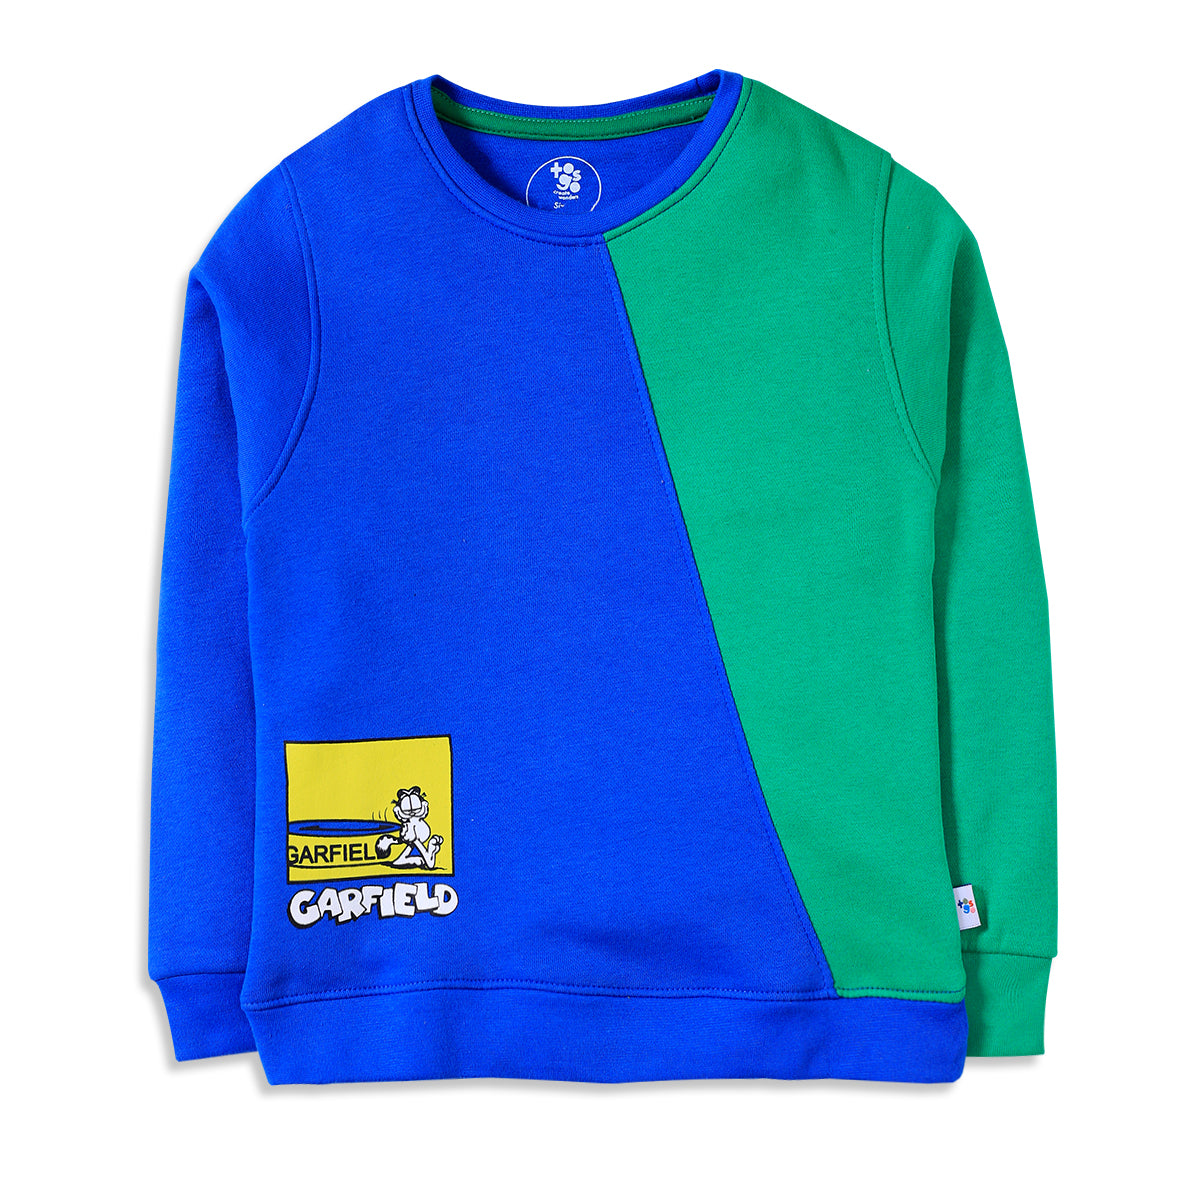 Garfield Navy and Green Track Suit